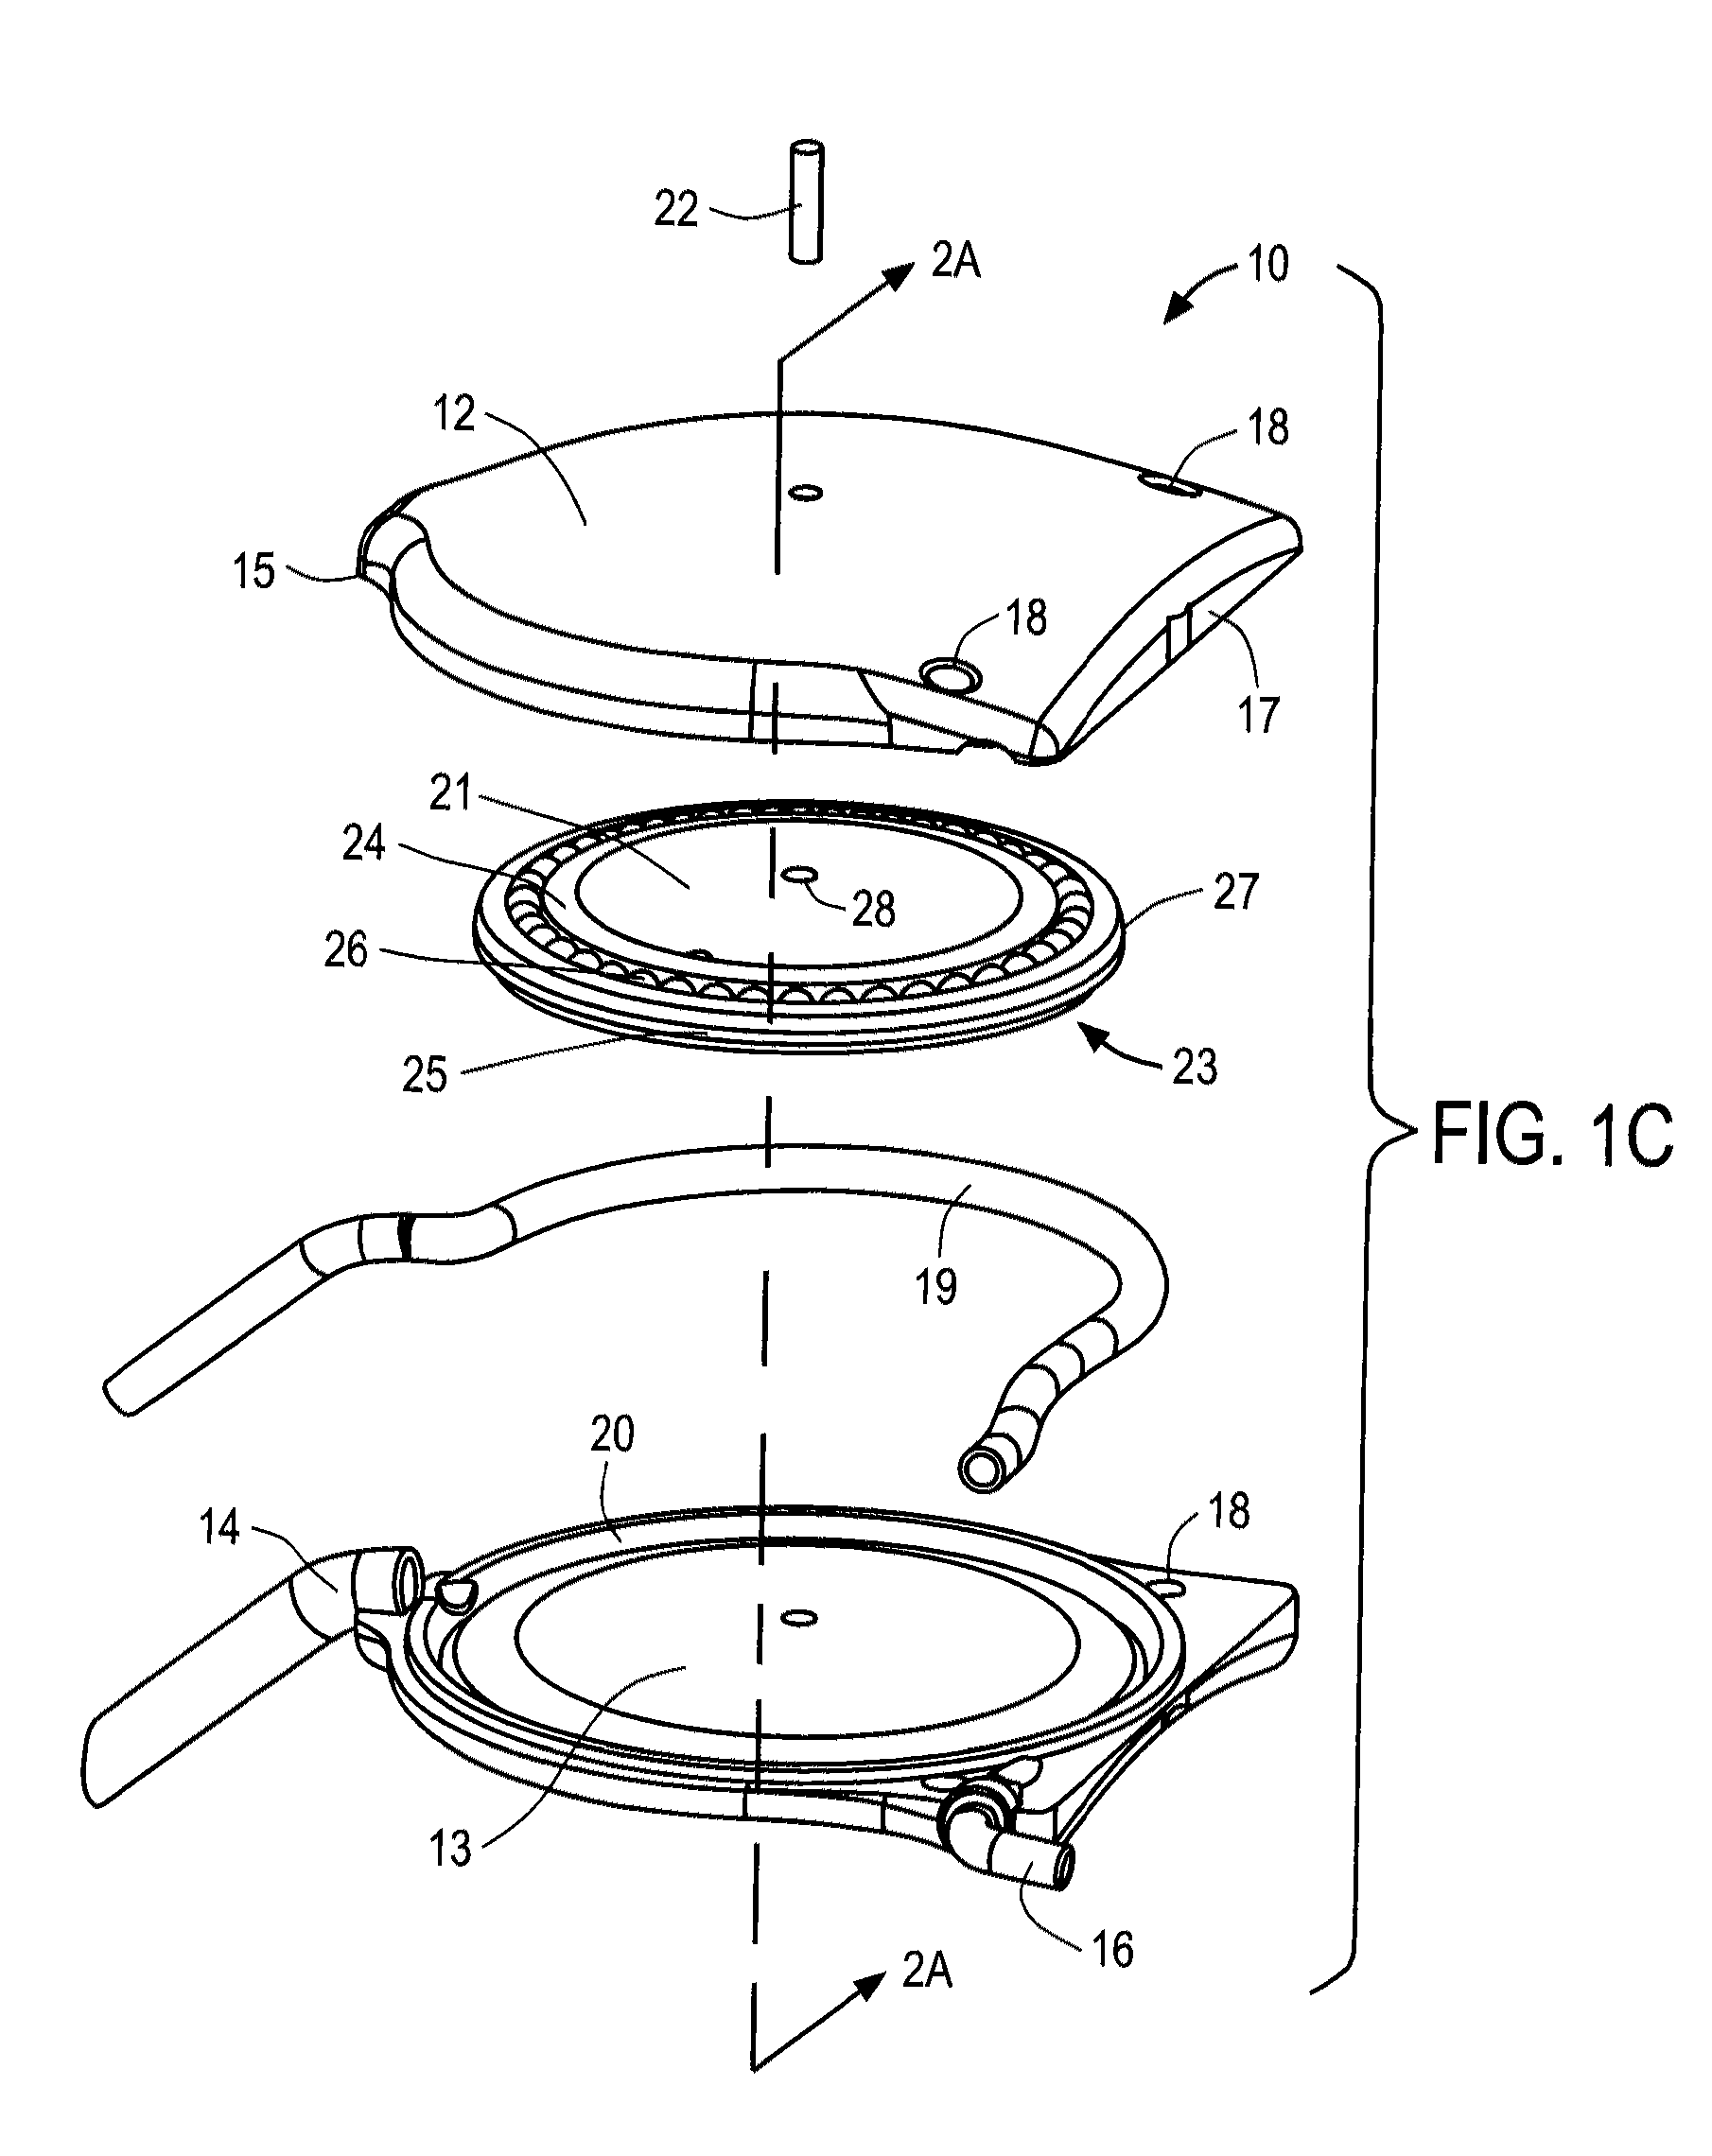 Apparatus and methods for treating excess intraocular fluid